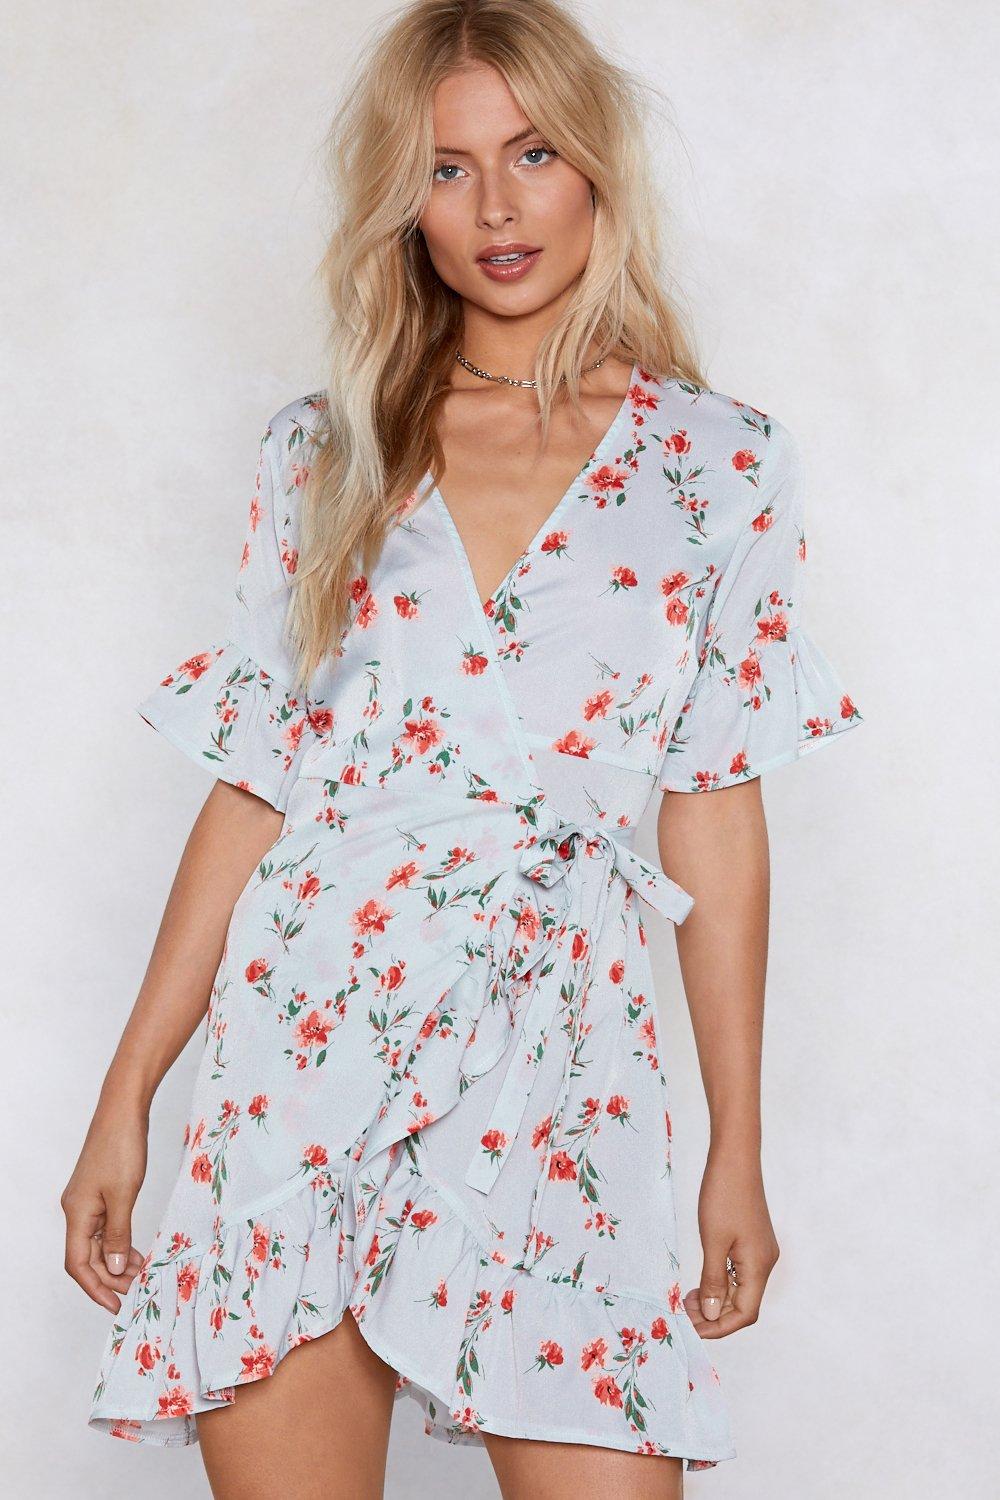 floral and pastel dress